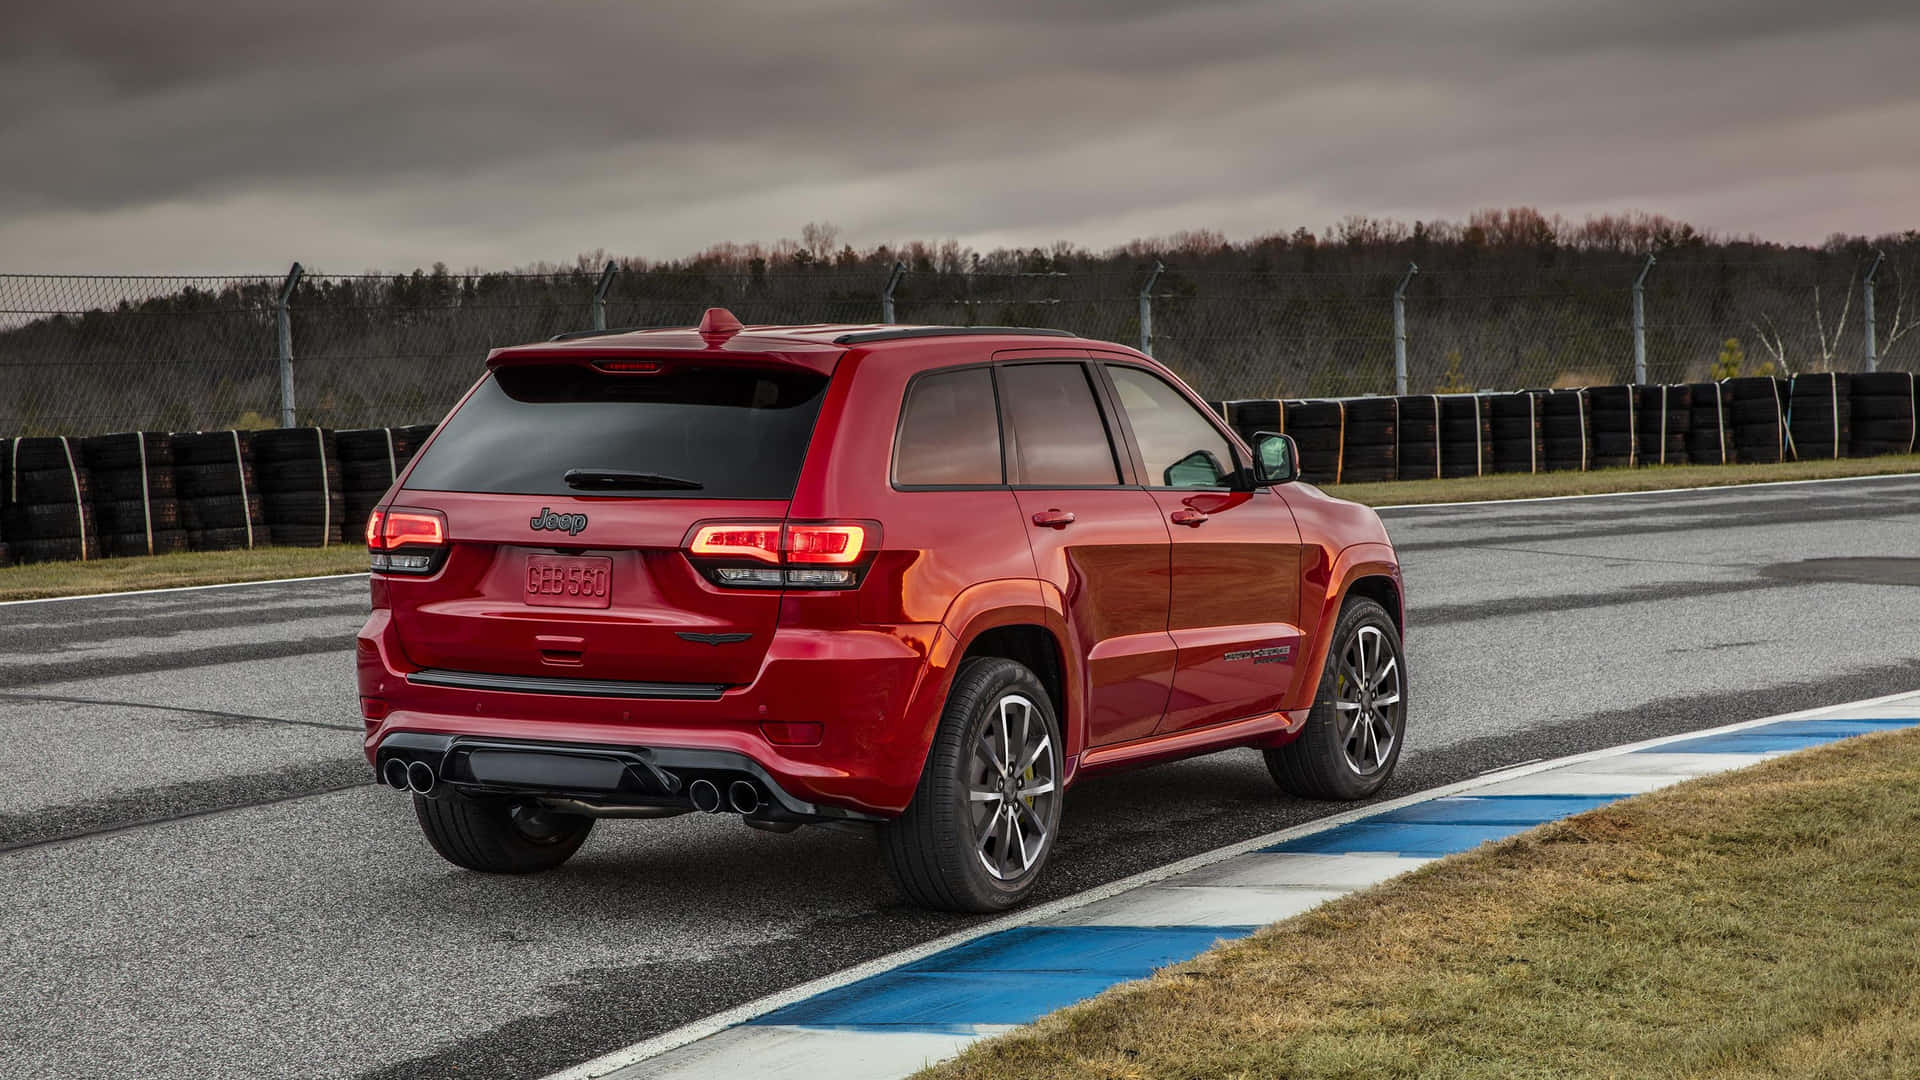 The Rear End Of A Red 2020 Jeep Grand Cherokee Wallpaper